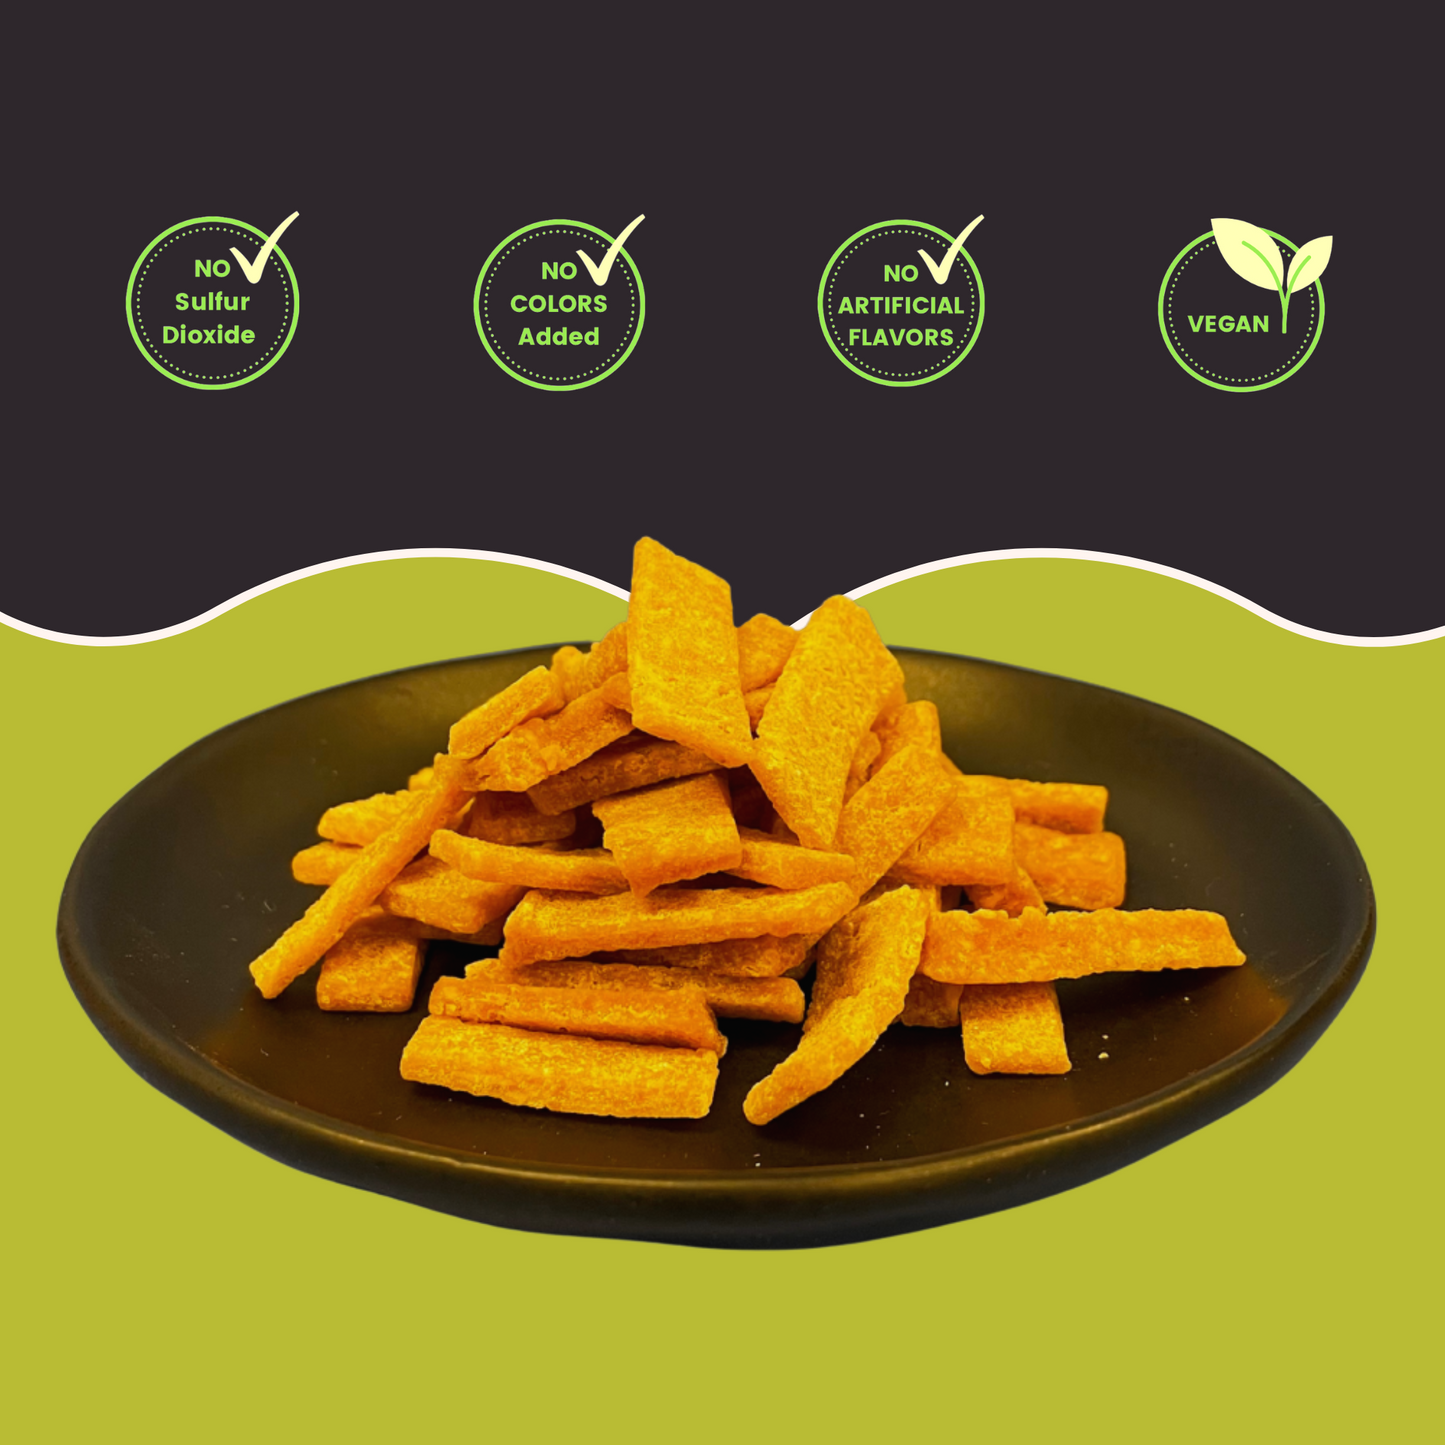 Naturally Nice Guava Strips 100g